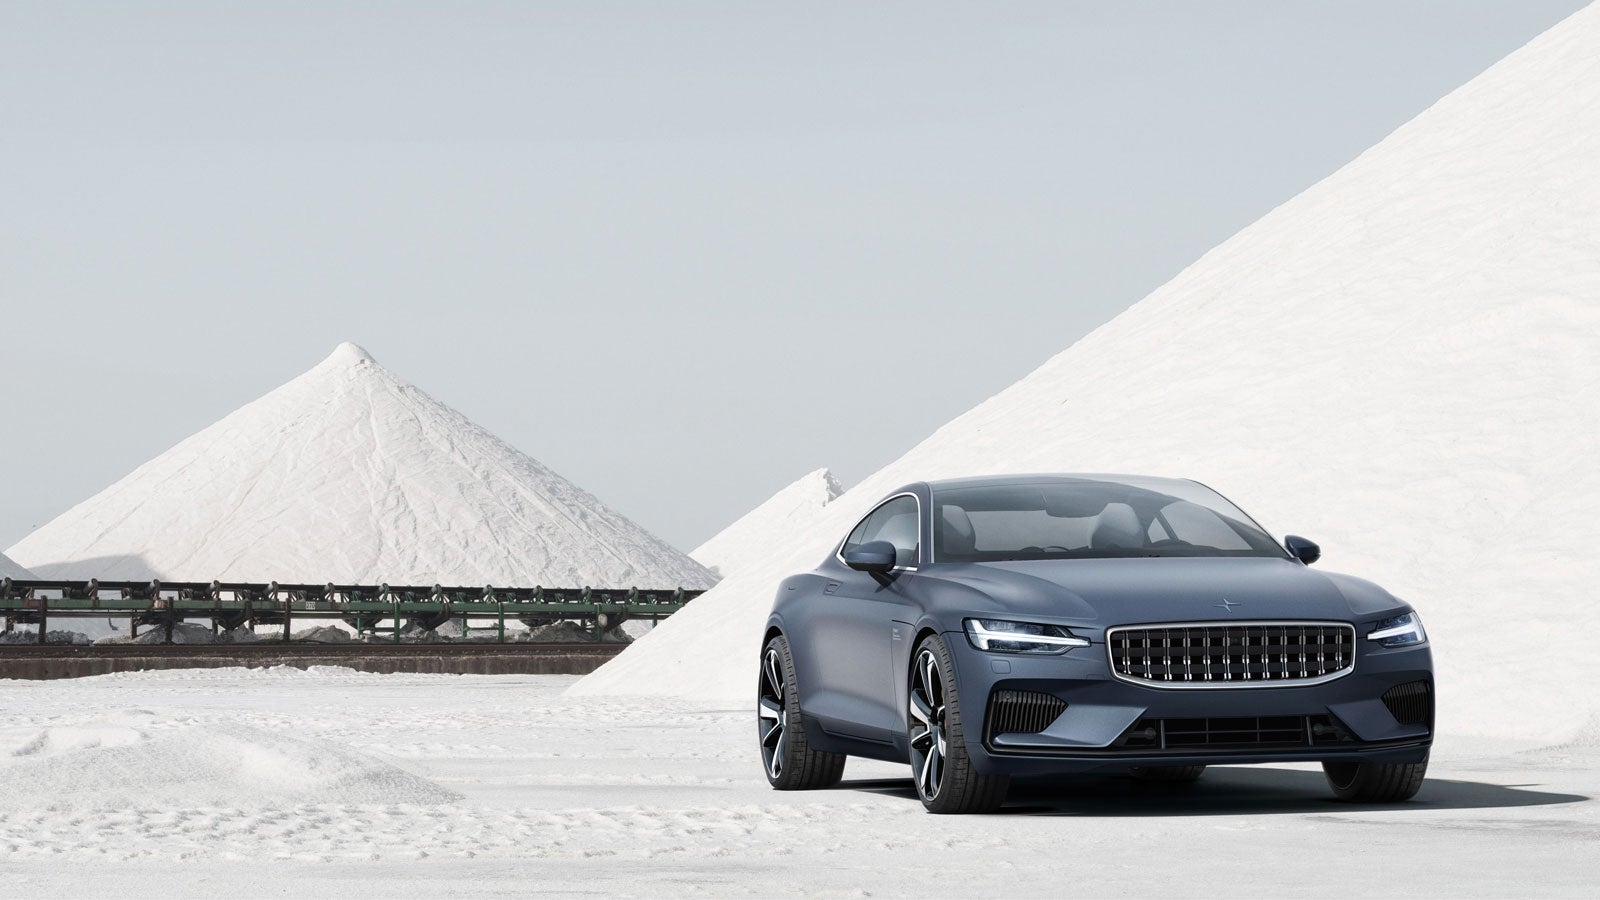 Modern Cars ‘Molest’ People With Their ‘Arrogant’ Styling: Polestar CEO